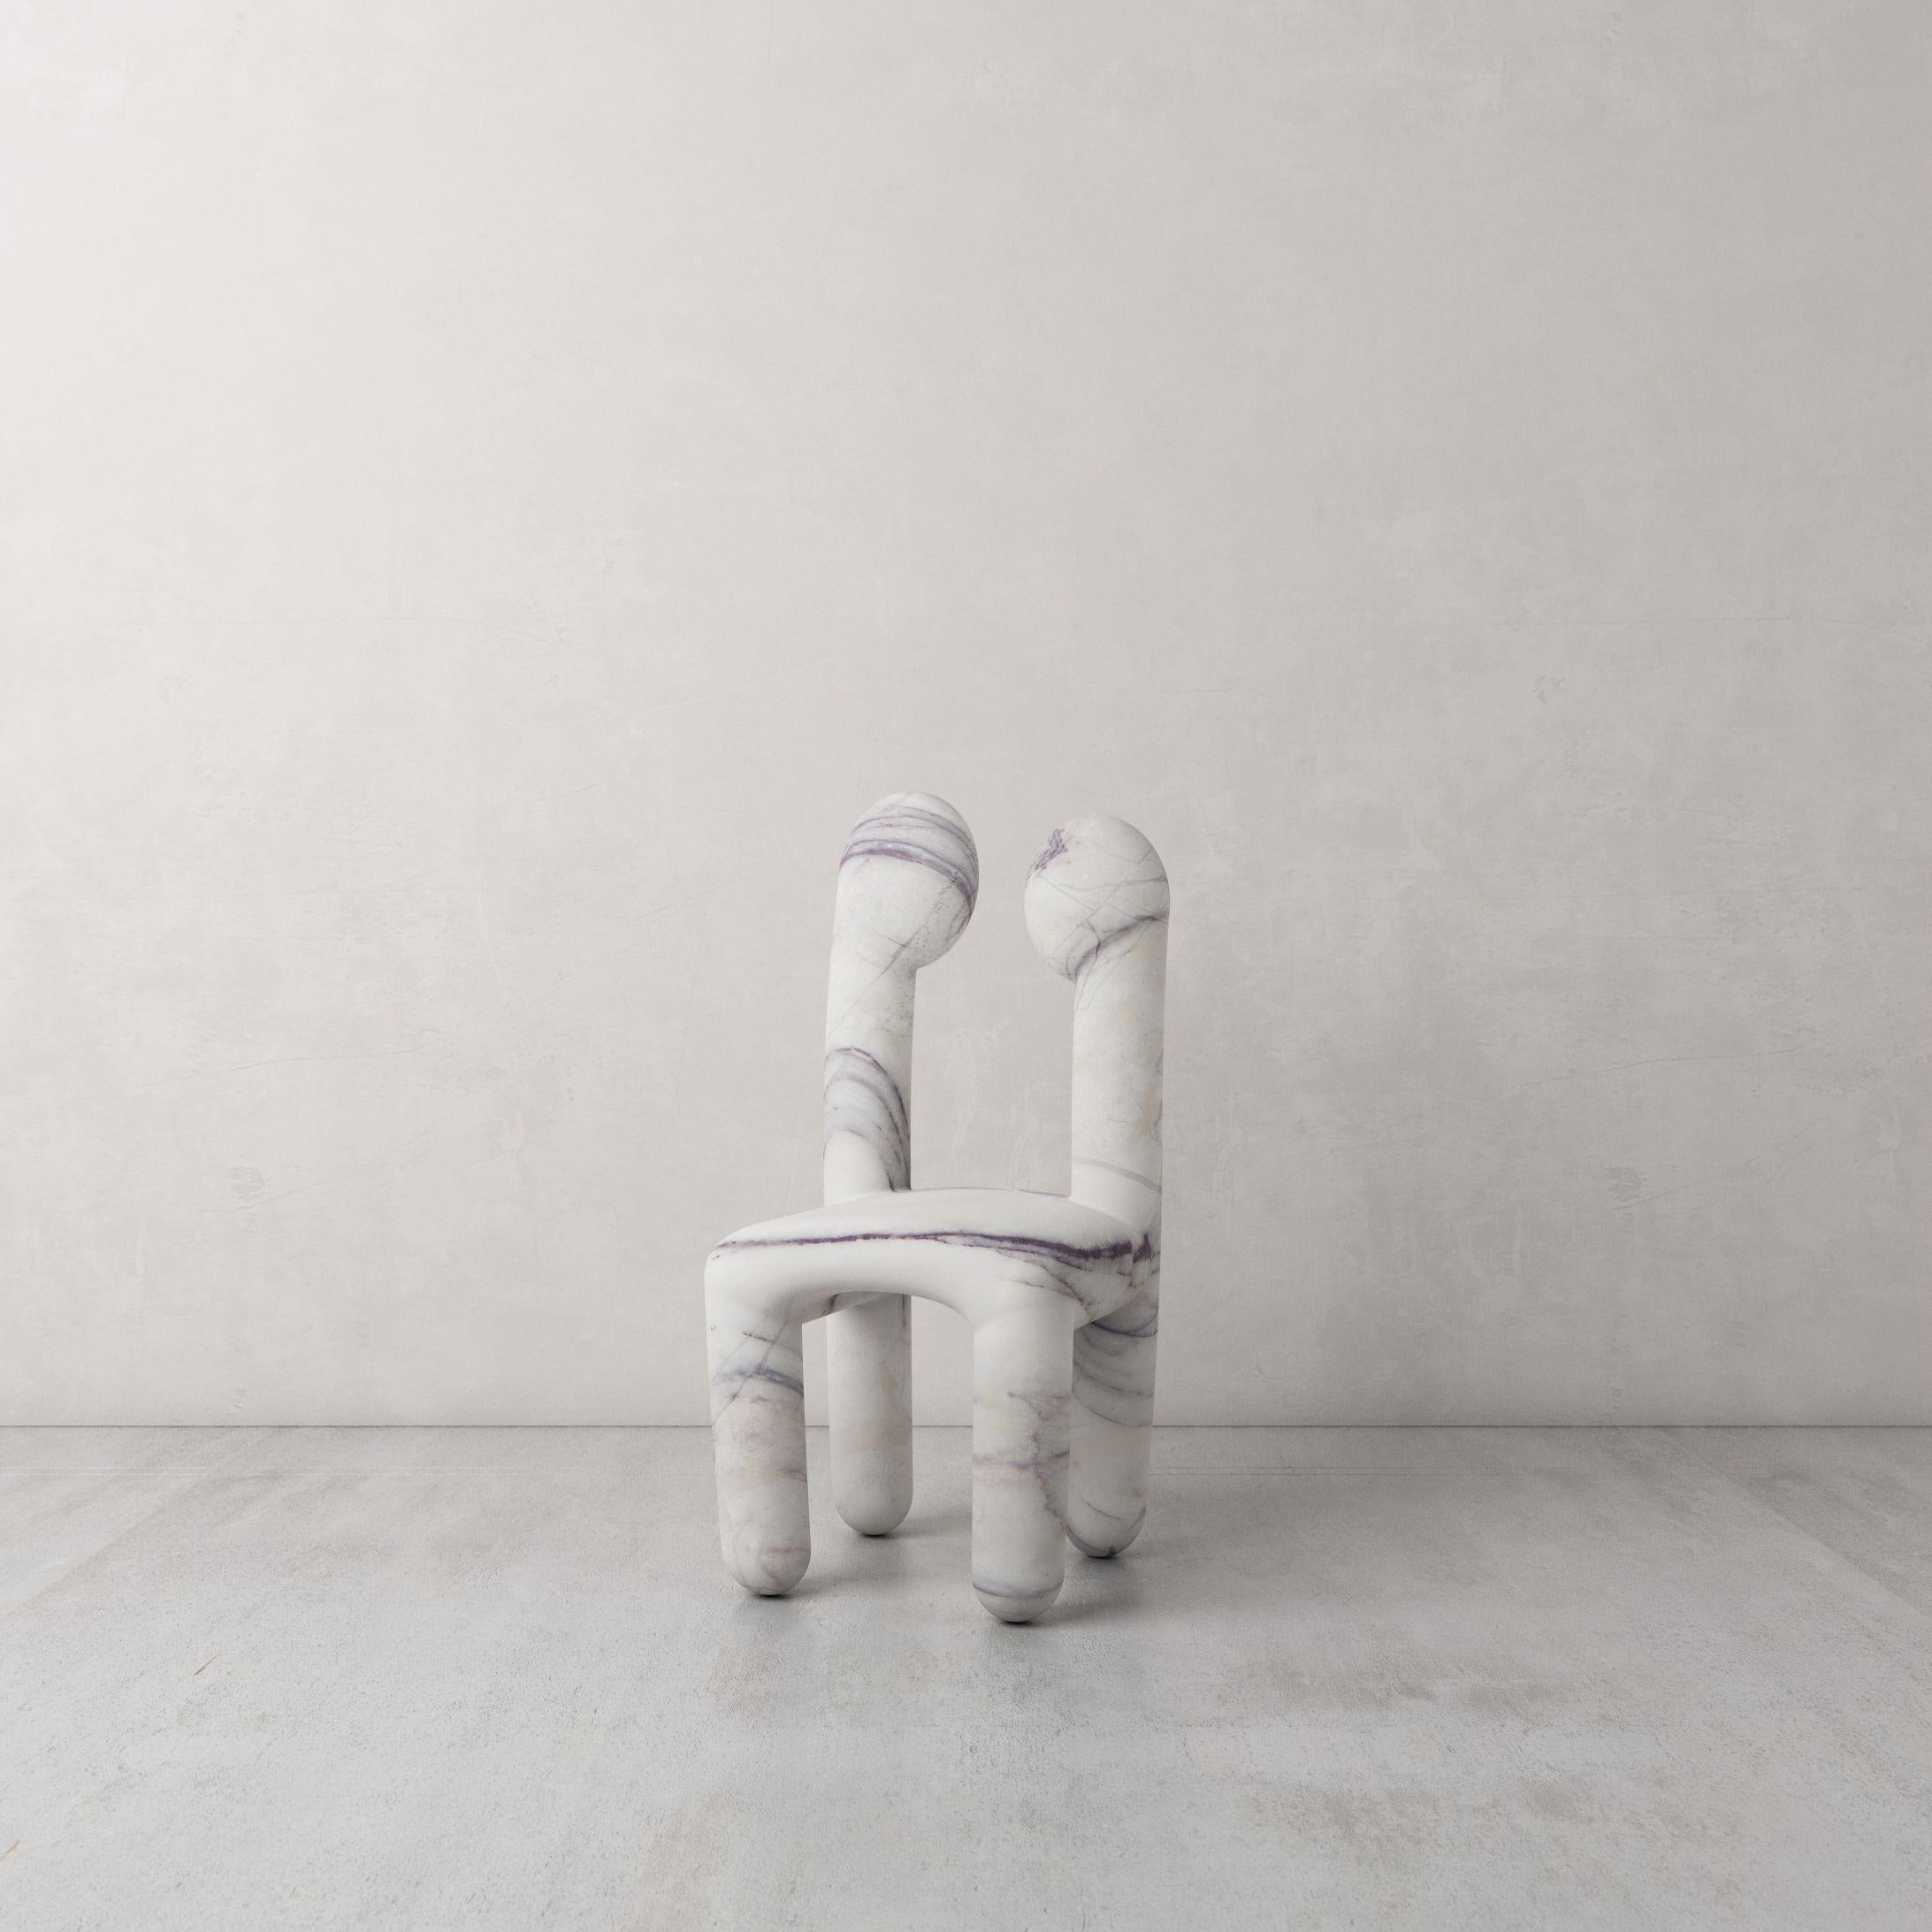 Urania Chair by Pietro Franceschini
Sold exclusively by Galerie Philia
Limited edition of 8, signed and numbered
Dimensions: H 80 x W 36 x D 36 cm
Seat Heigh: 38 CM
Weight: 65kg
Materials: Marble (Calacatta Viola)


Pietro Franceschini is